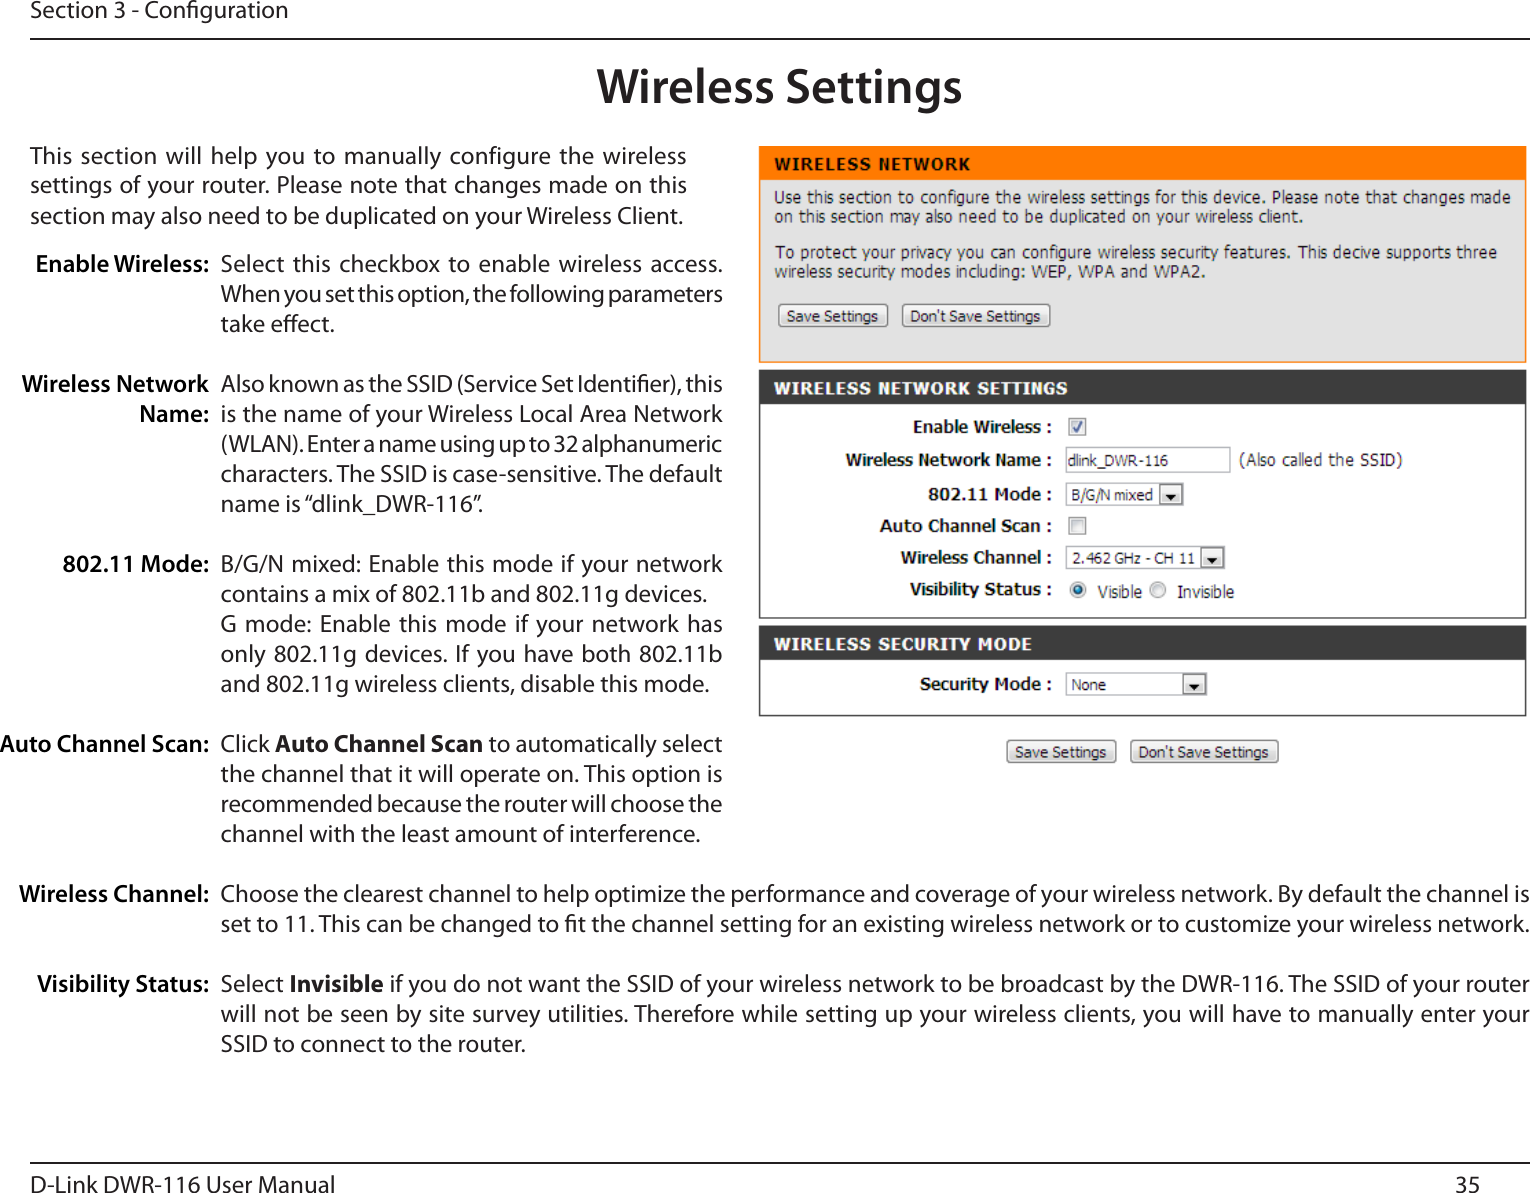 35D-Link DWR-116 User ManualSection 3 - CongurationWireless SettingsThis section  will help you to manually  configure the wireless settings of your router. Please note that changes made on this section may also need to be duplicated on your Wireless Client.Select  this checkbox to enable wireless access. When you set this option, the following parameters take eect.Also known as the SSID (Service Set Identier), this is the name of your Wireless Local Area Network (WLAN). Enter a name using up to 32 alphanumeric characters. The SSID is case-sensitive. The default name is “dlink_DWR-116”.B/G/N mixed: Enable this mode if your network contains a mix of 802.11b and 802.11g devices.G mode:  Enable this mode  if your network  has only 802.11g devices. If you have both 802.11b and 802.11g wireless clients, disable this mode.Click Auto Channel Scan to automatically select the channel that it will operate on. This option is recommended because the router will choose the channel with the least amount of interference.Choose the clearest channel to help optimize the performance and coverage of your wireless network. By default the channel is set to 11. This can be changed to t the channel setting for an existing wireless network or to customize your wireless network. Select Invisible if you do not want the SSID of your wireless network to be broadcast by the DWR-116. The SSID of your router will not be seen by site survey utilities. Therefore while setting up your wireless clients, you will have to manually enter your SSID to connect to the router.Enable Wireless:Wireless Network Name:802.11 Mode:Auto Channel Scan:Wireless Channel:Visibility Status: